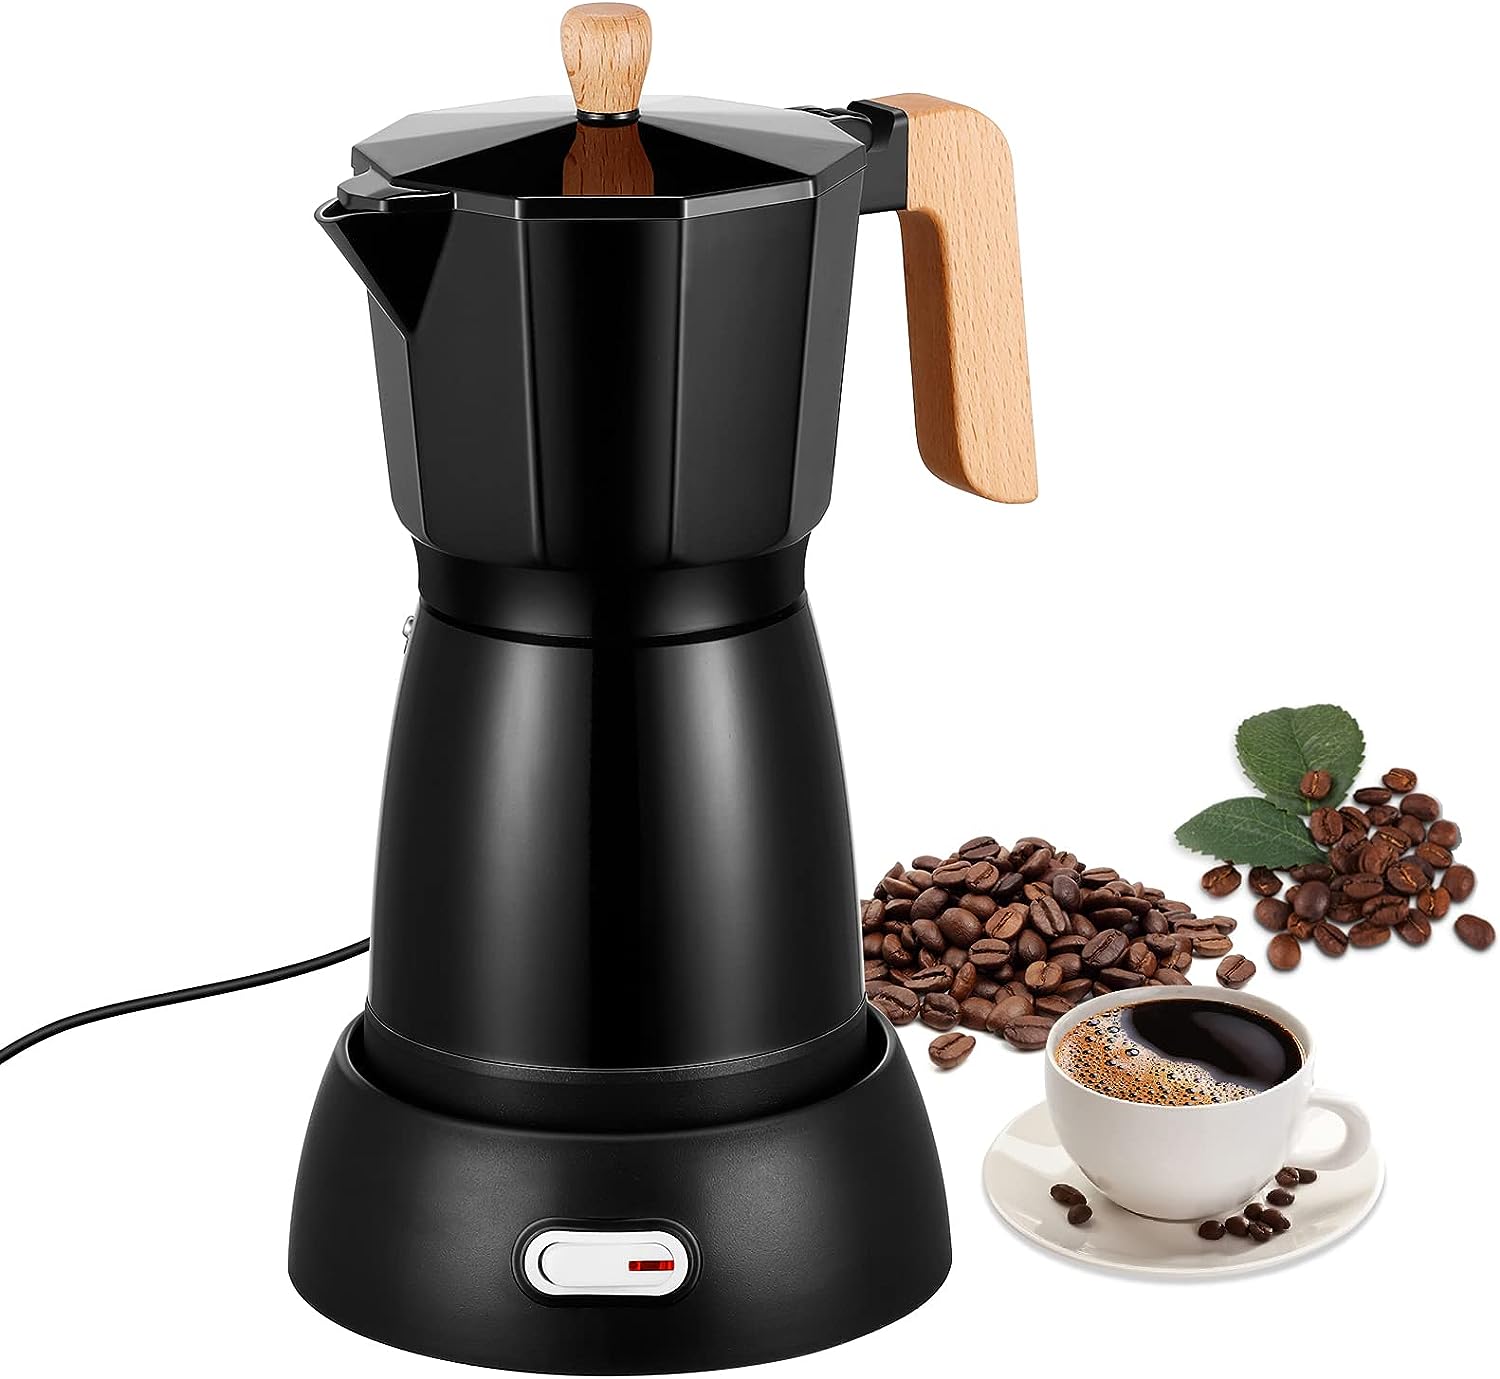 SHANGSKY Coffee Pot Electric Coffee Maker Review